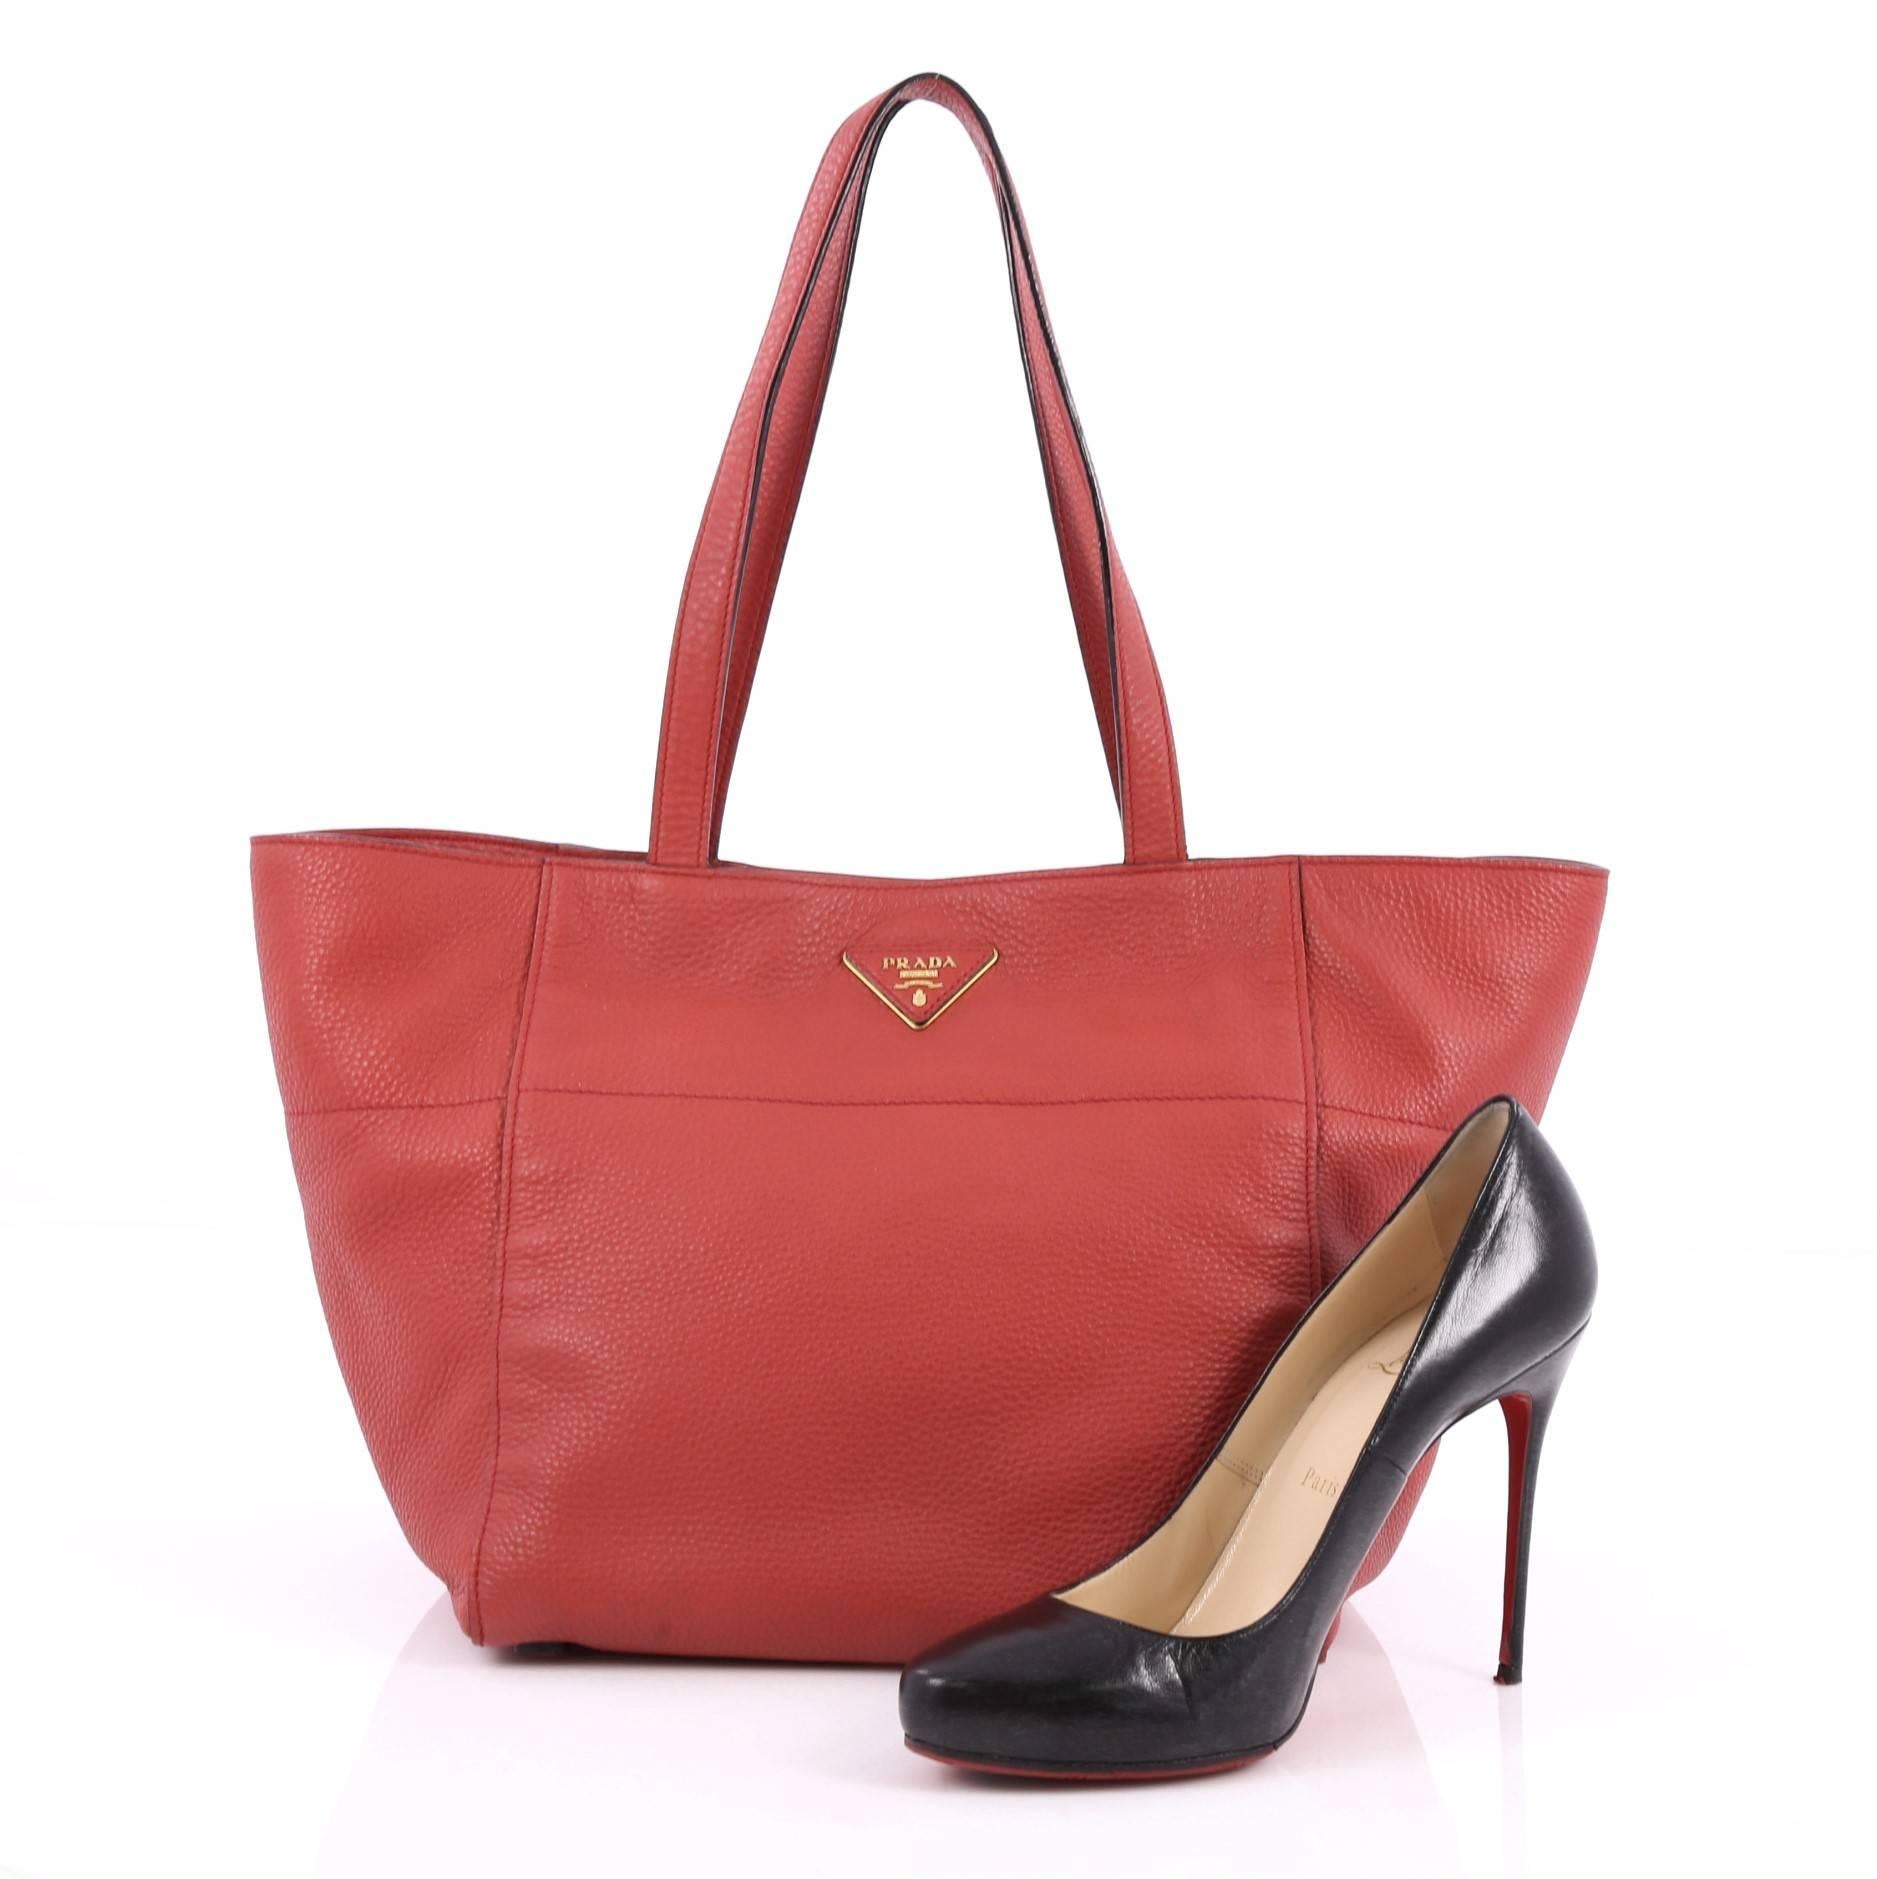 This authentic Prada Open Tote Vitello Daino Small is a chic and stylish everyday bag for casual looks. Crafted from red vitello daino leather, this simple, functional tote features dual-flat leather handles, signature Prada logo, protective base